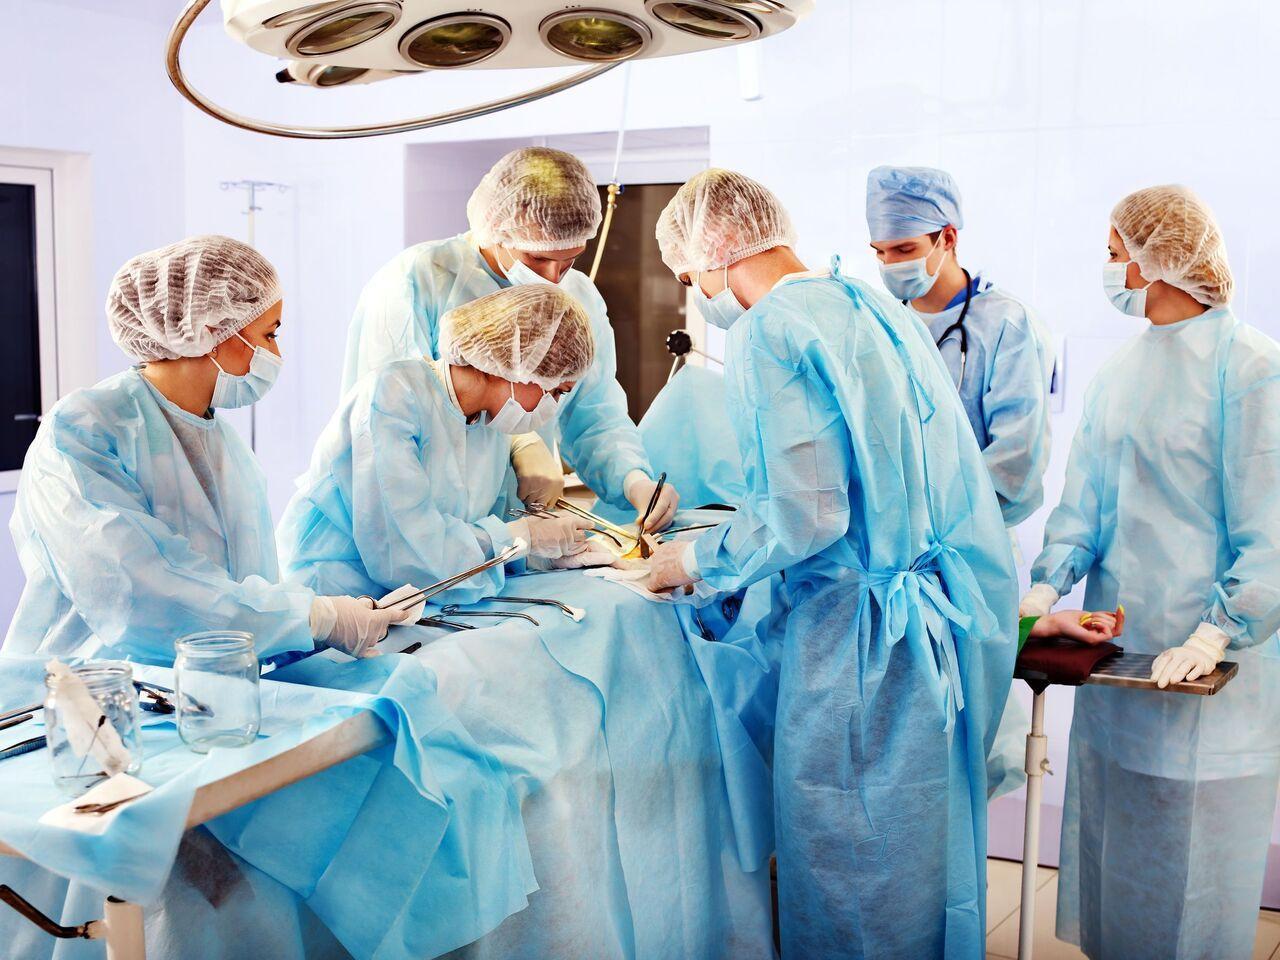 Plastic Surgery Malpractice—Can You Sue If You Don't Like Your